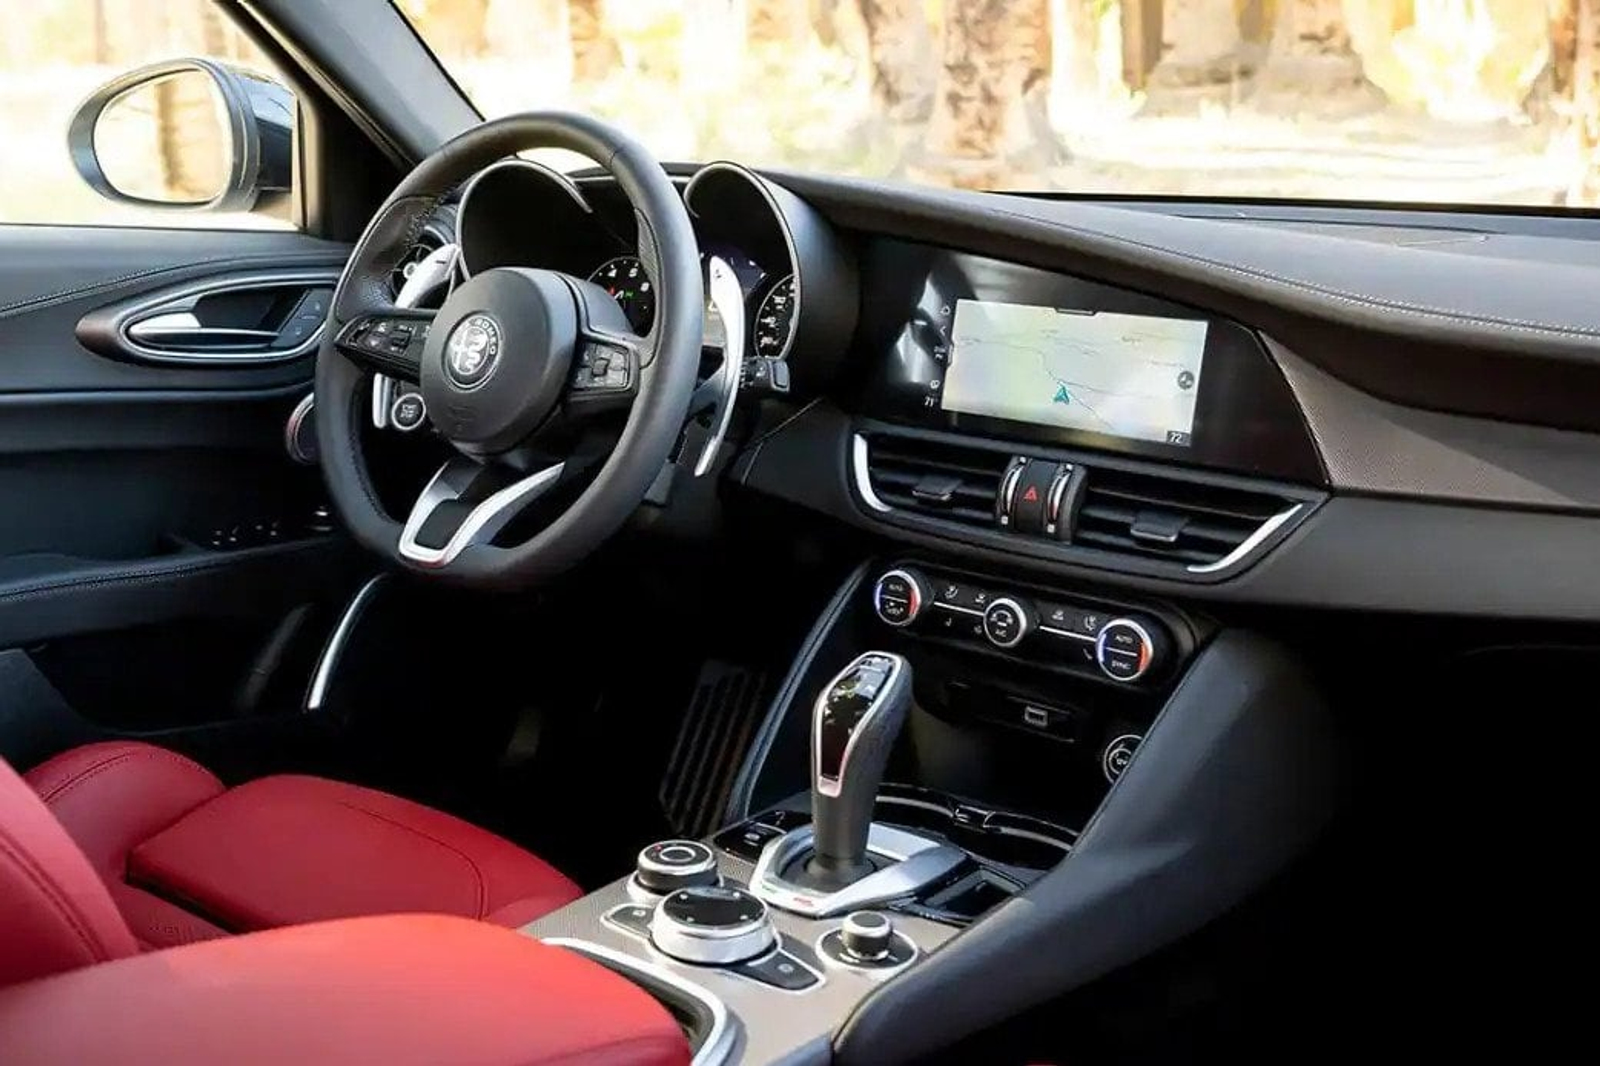 sports cars, interior, alfa romeo will keep building cars with driver-focused cabins